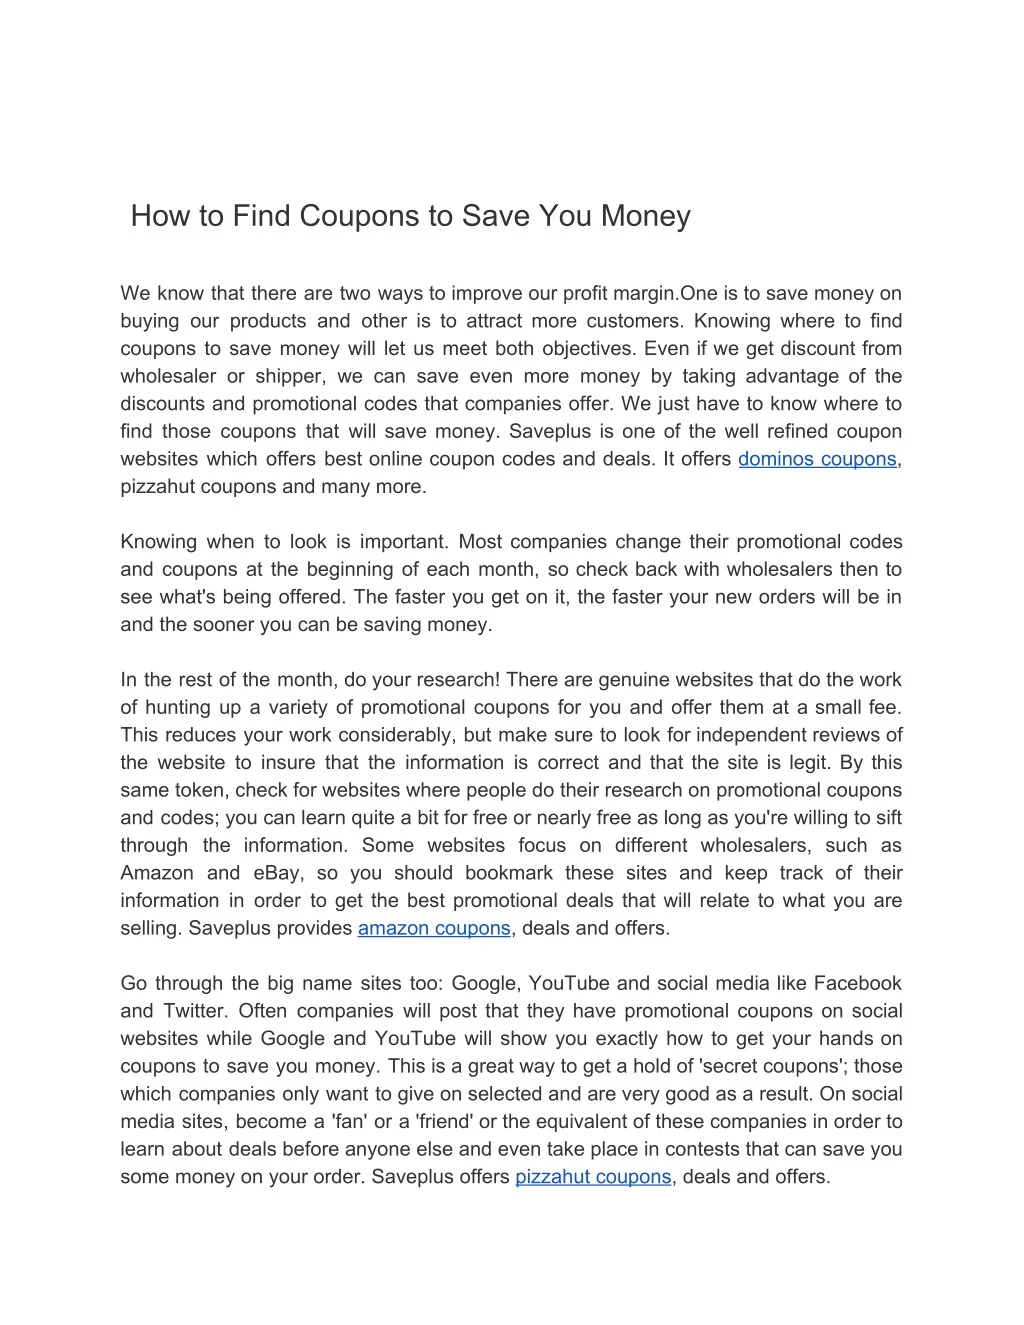 how to find coupons to save you money